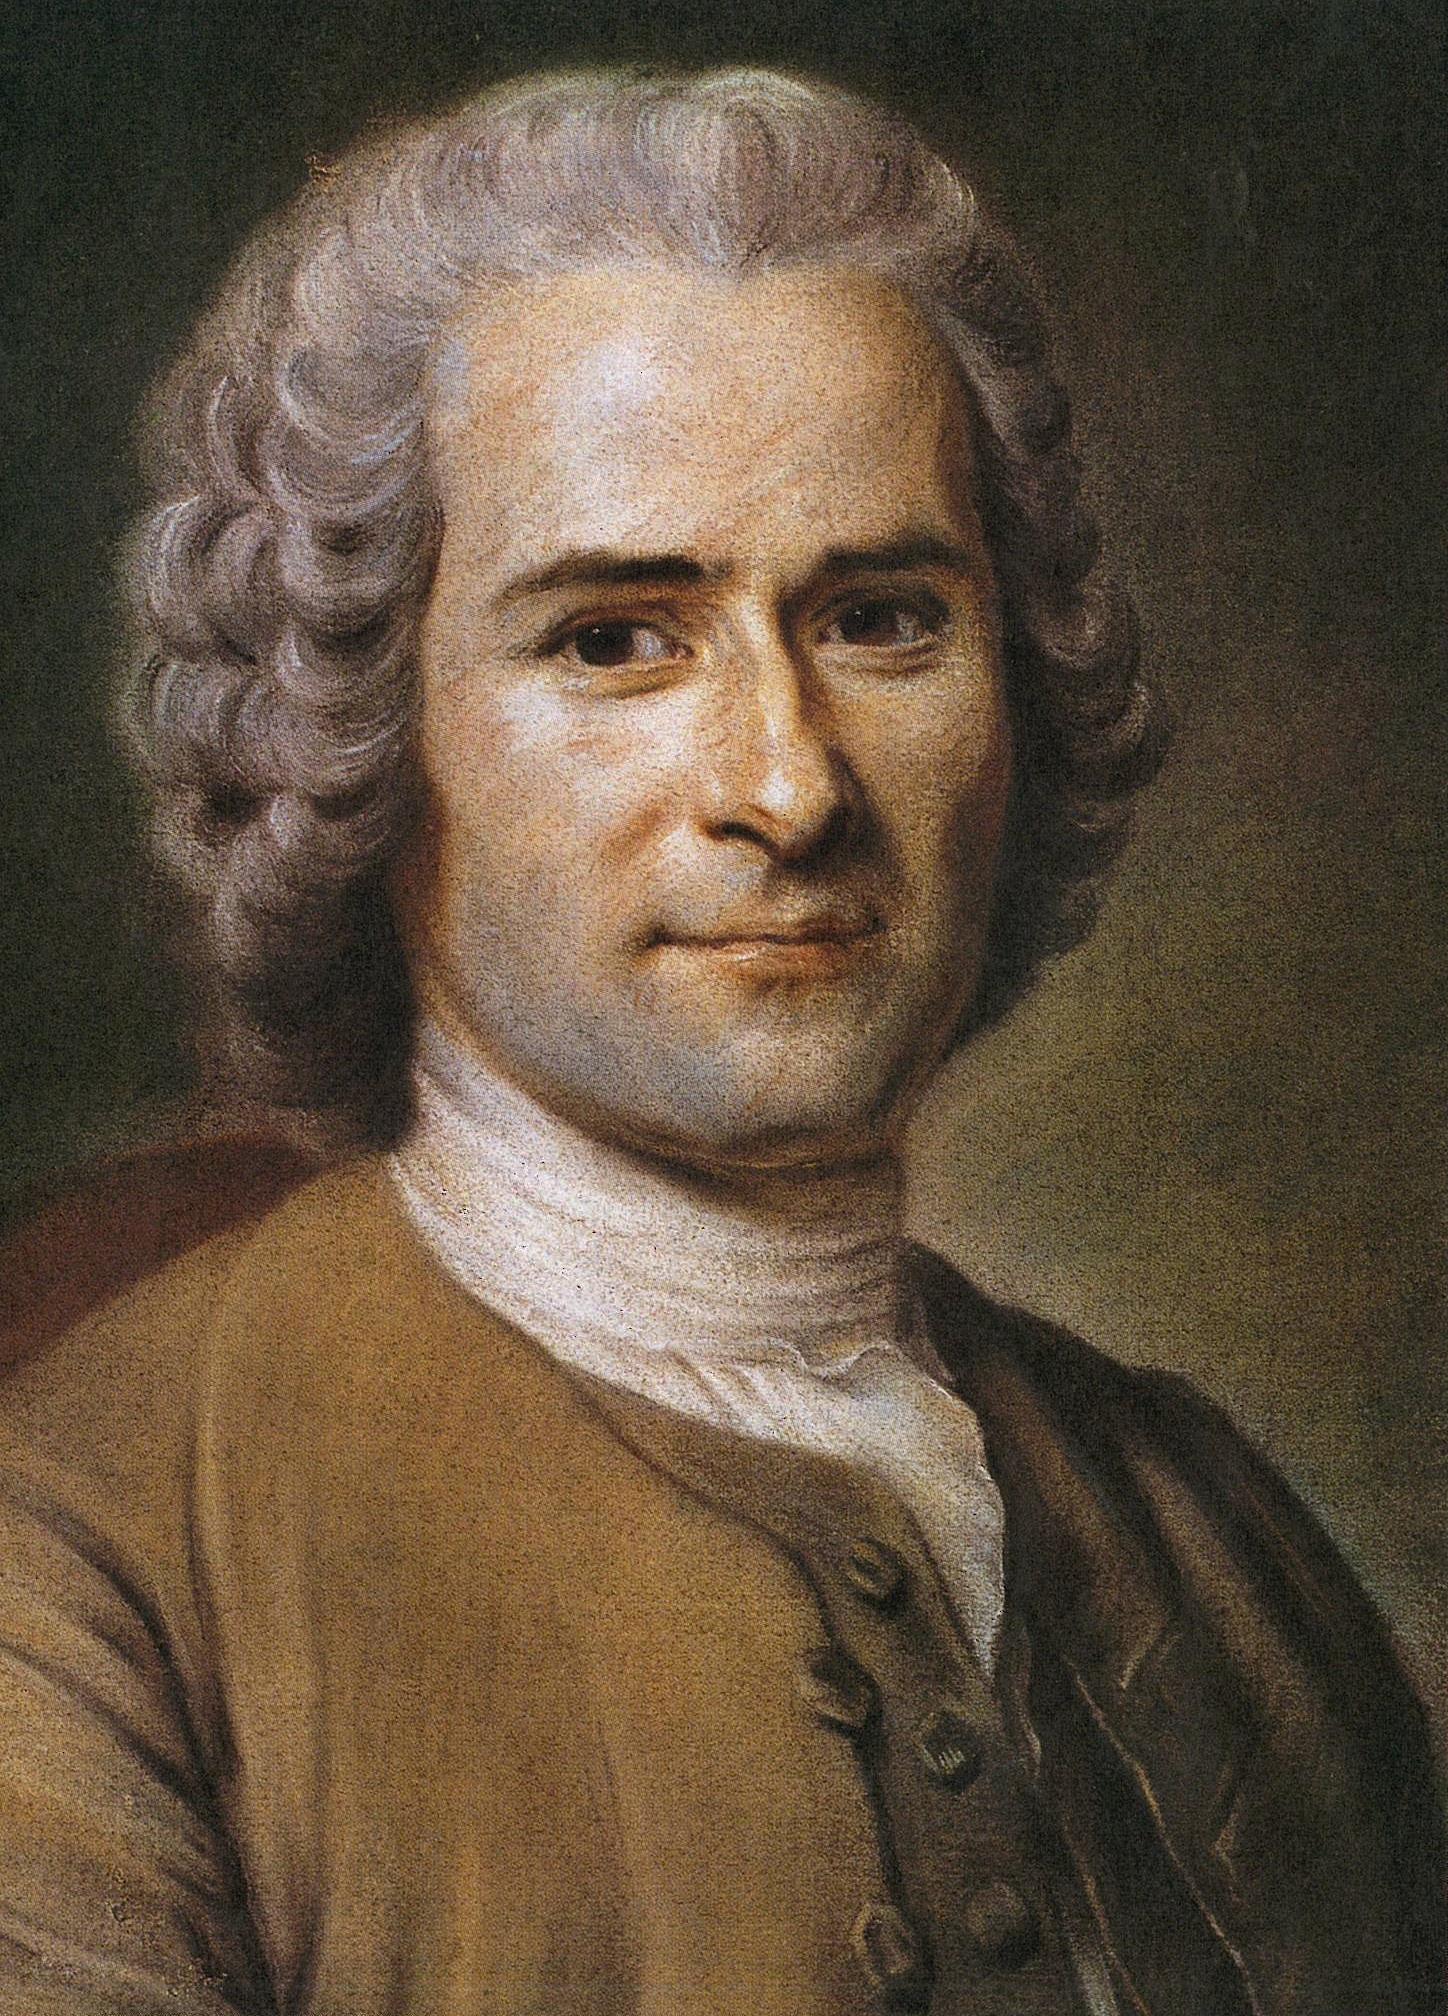 Birth of Jean-Jacques Rousseau